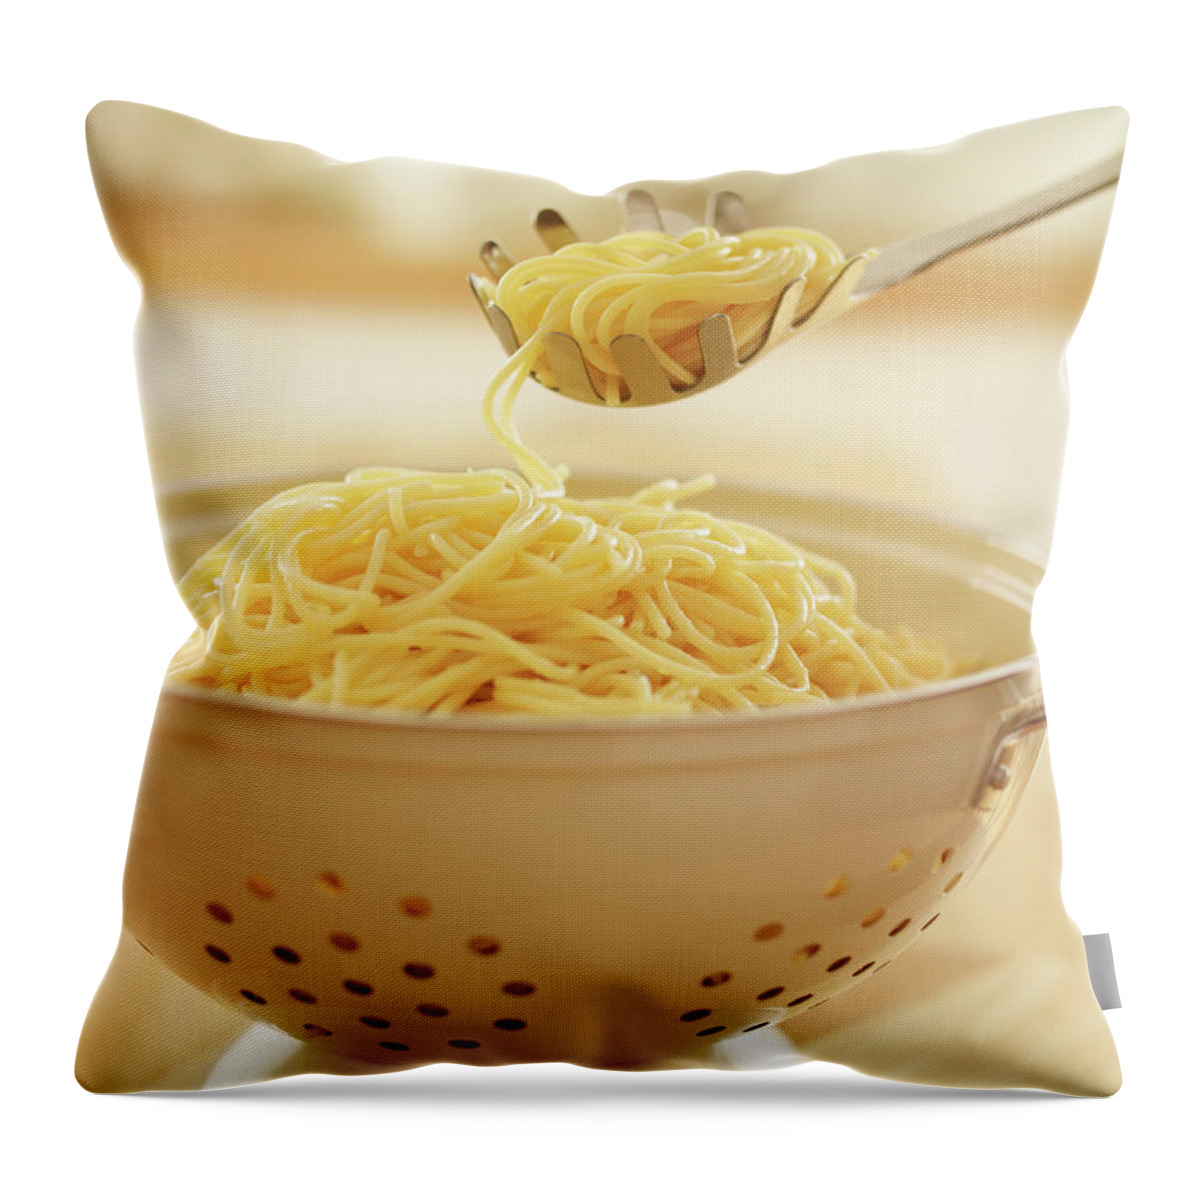 Italian Food Throw Pillow featuring the photograph Close Up Of Spoon Scooping Spaghetti In by Adam Gault